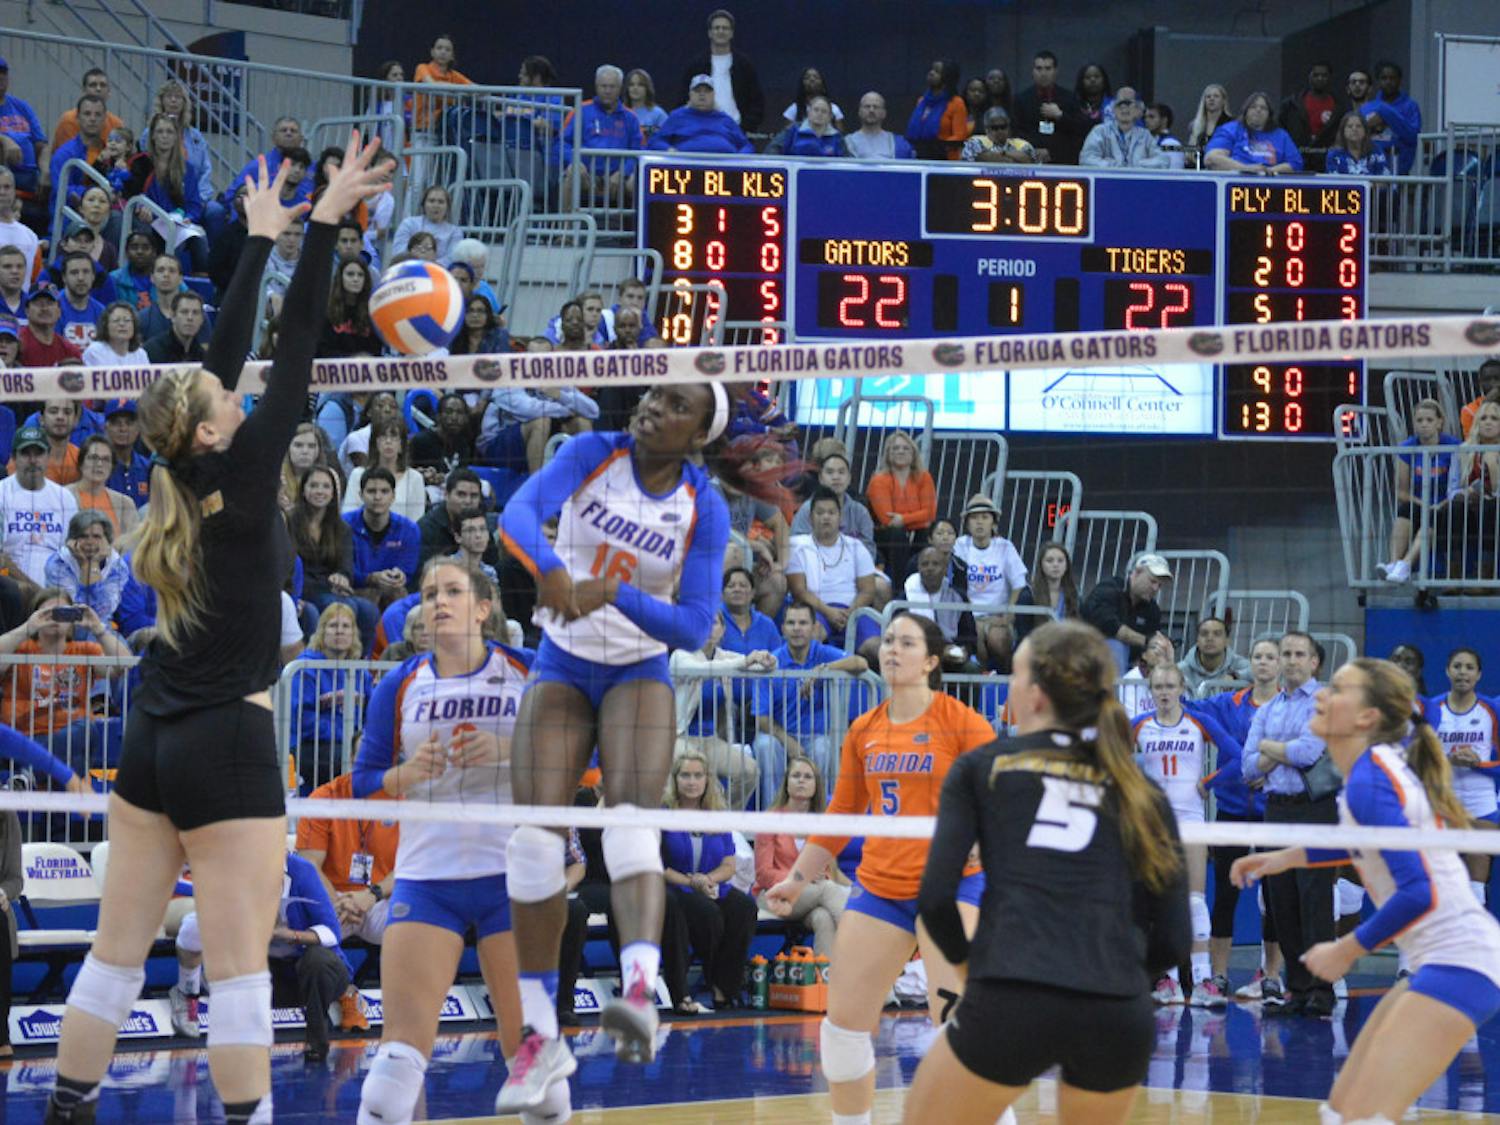 Sophomore middle blocker Simone Antwi spikes the ball during the Gators' 3-0 loss to the Tigers on Friday night in the O'Connell Center.